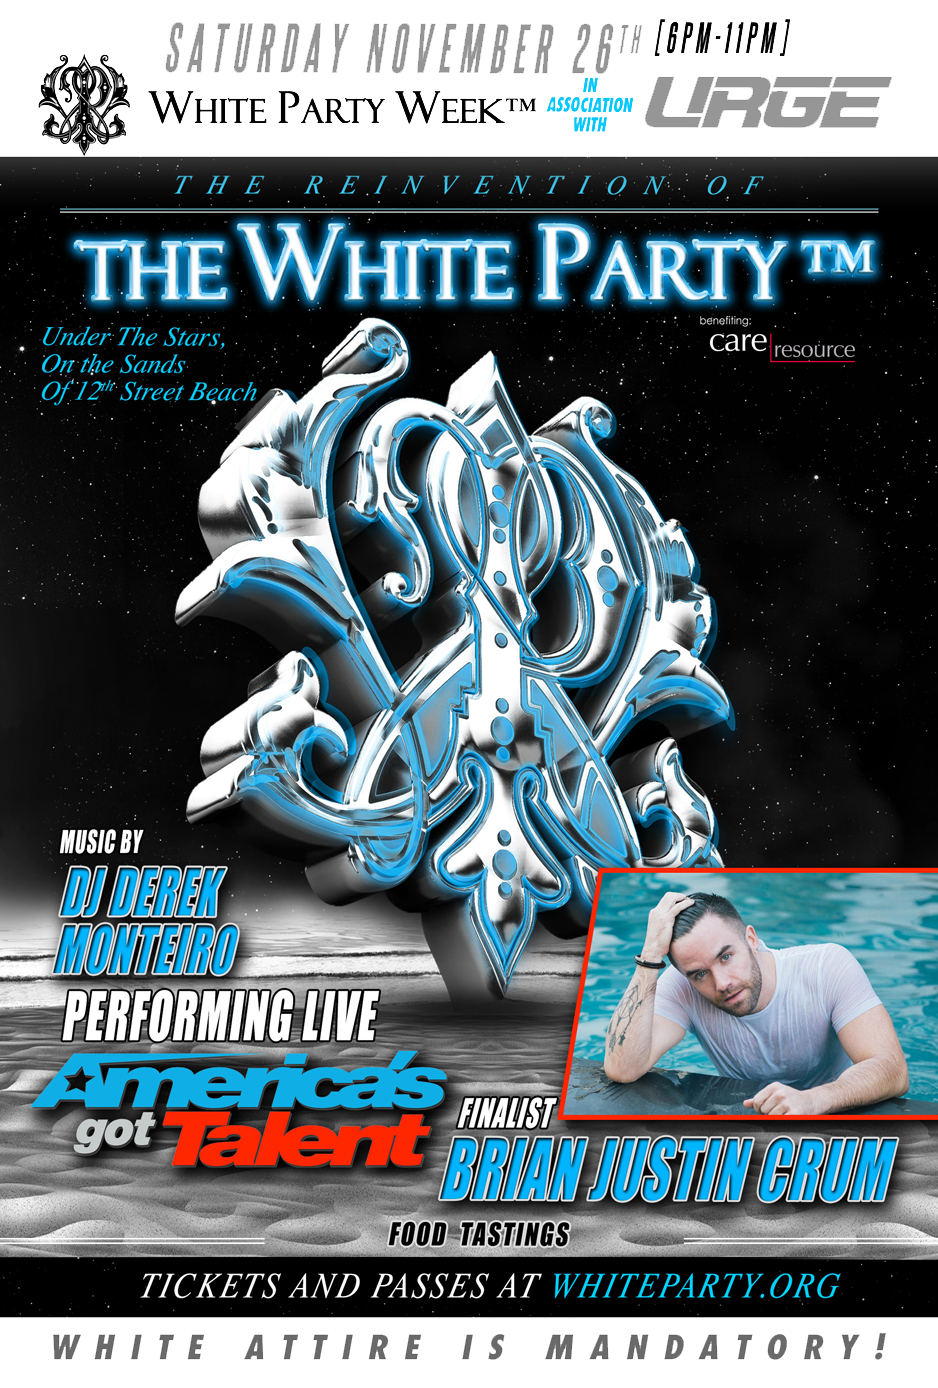 the reinvention of the white party event by white party week